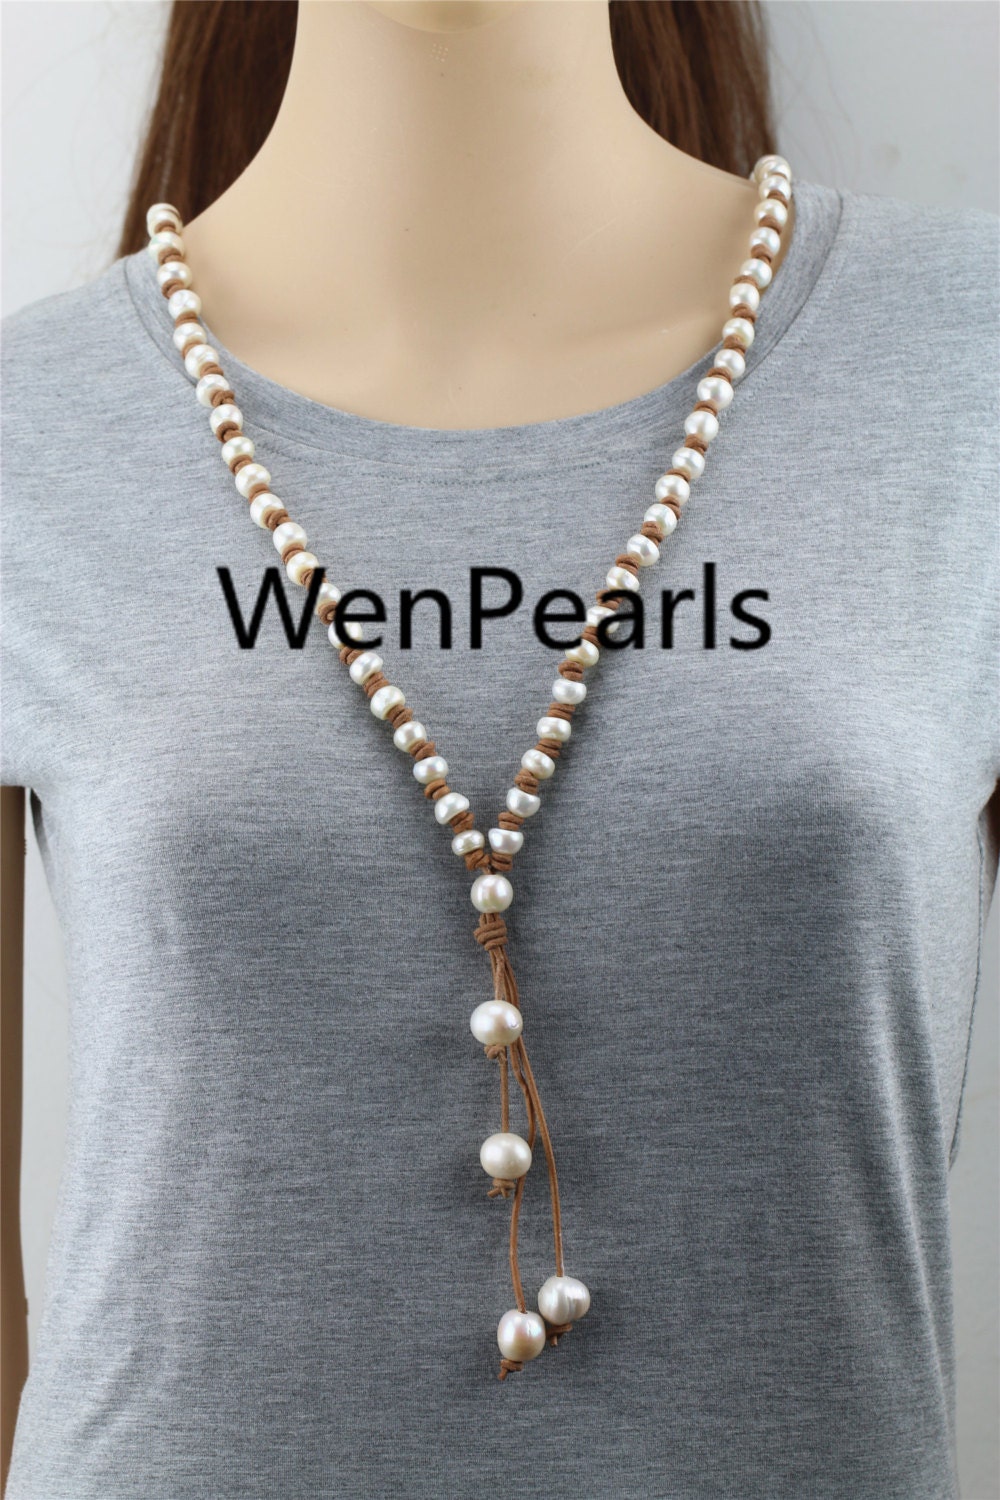 Bags of 48 7mm White Faux Pearl Necklaces 12 per Bag 24 Total